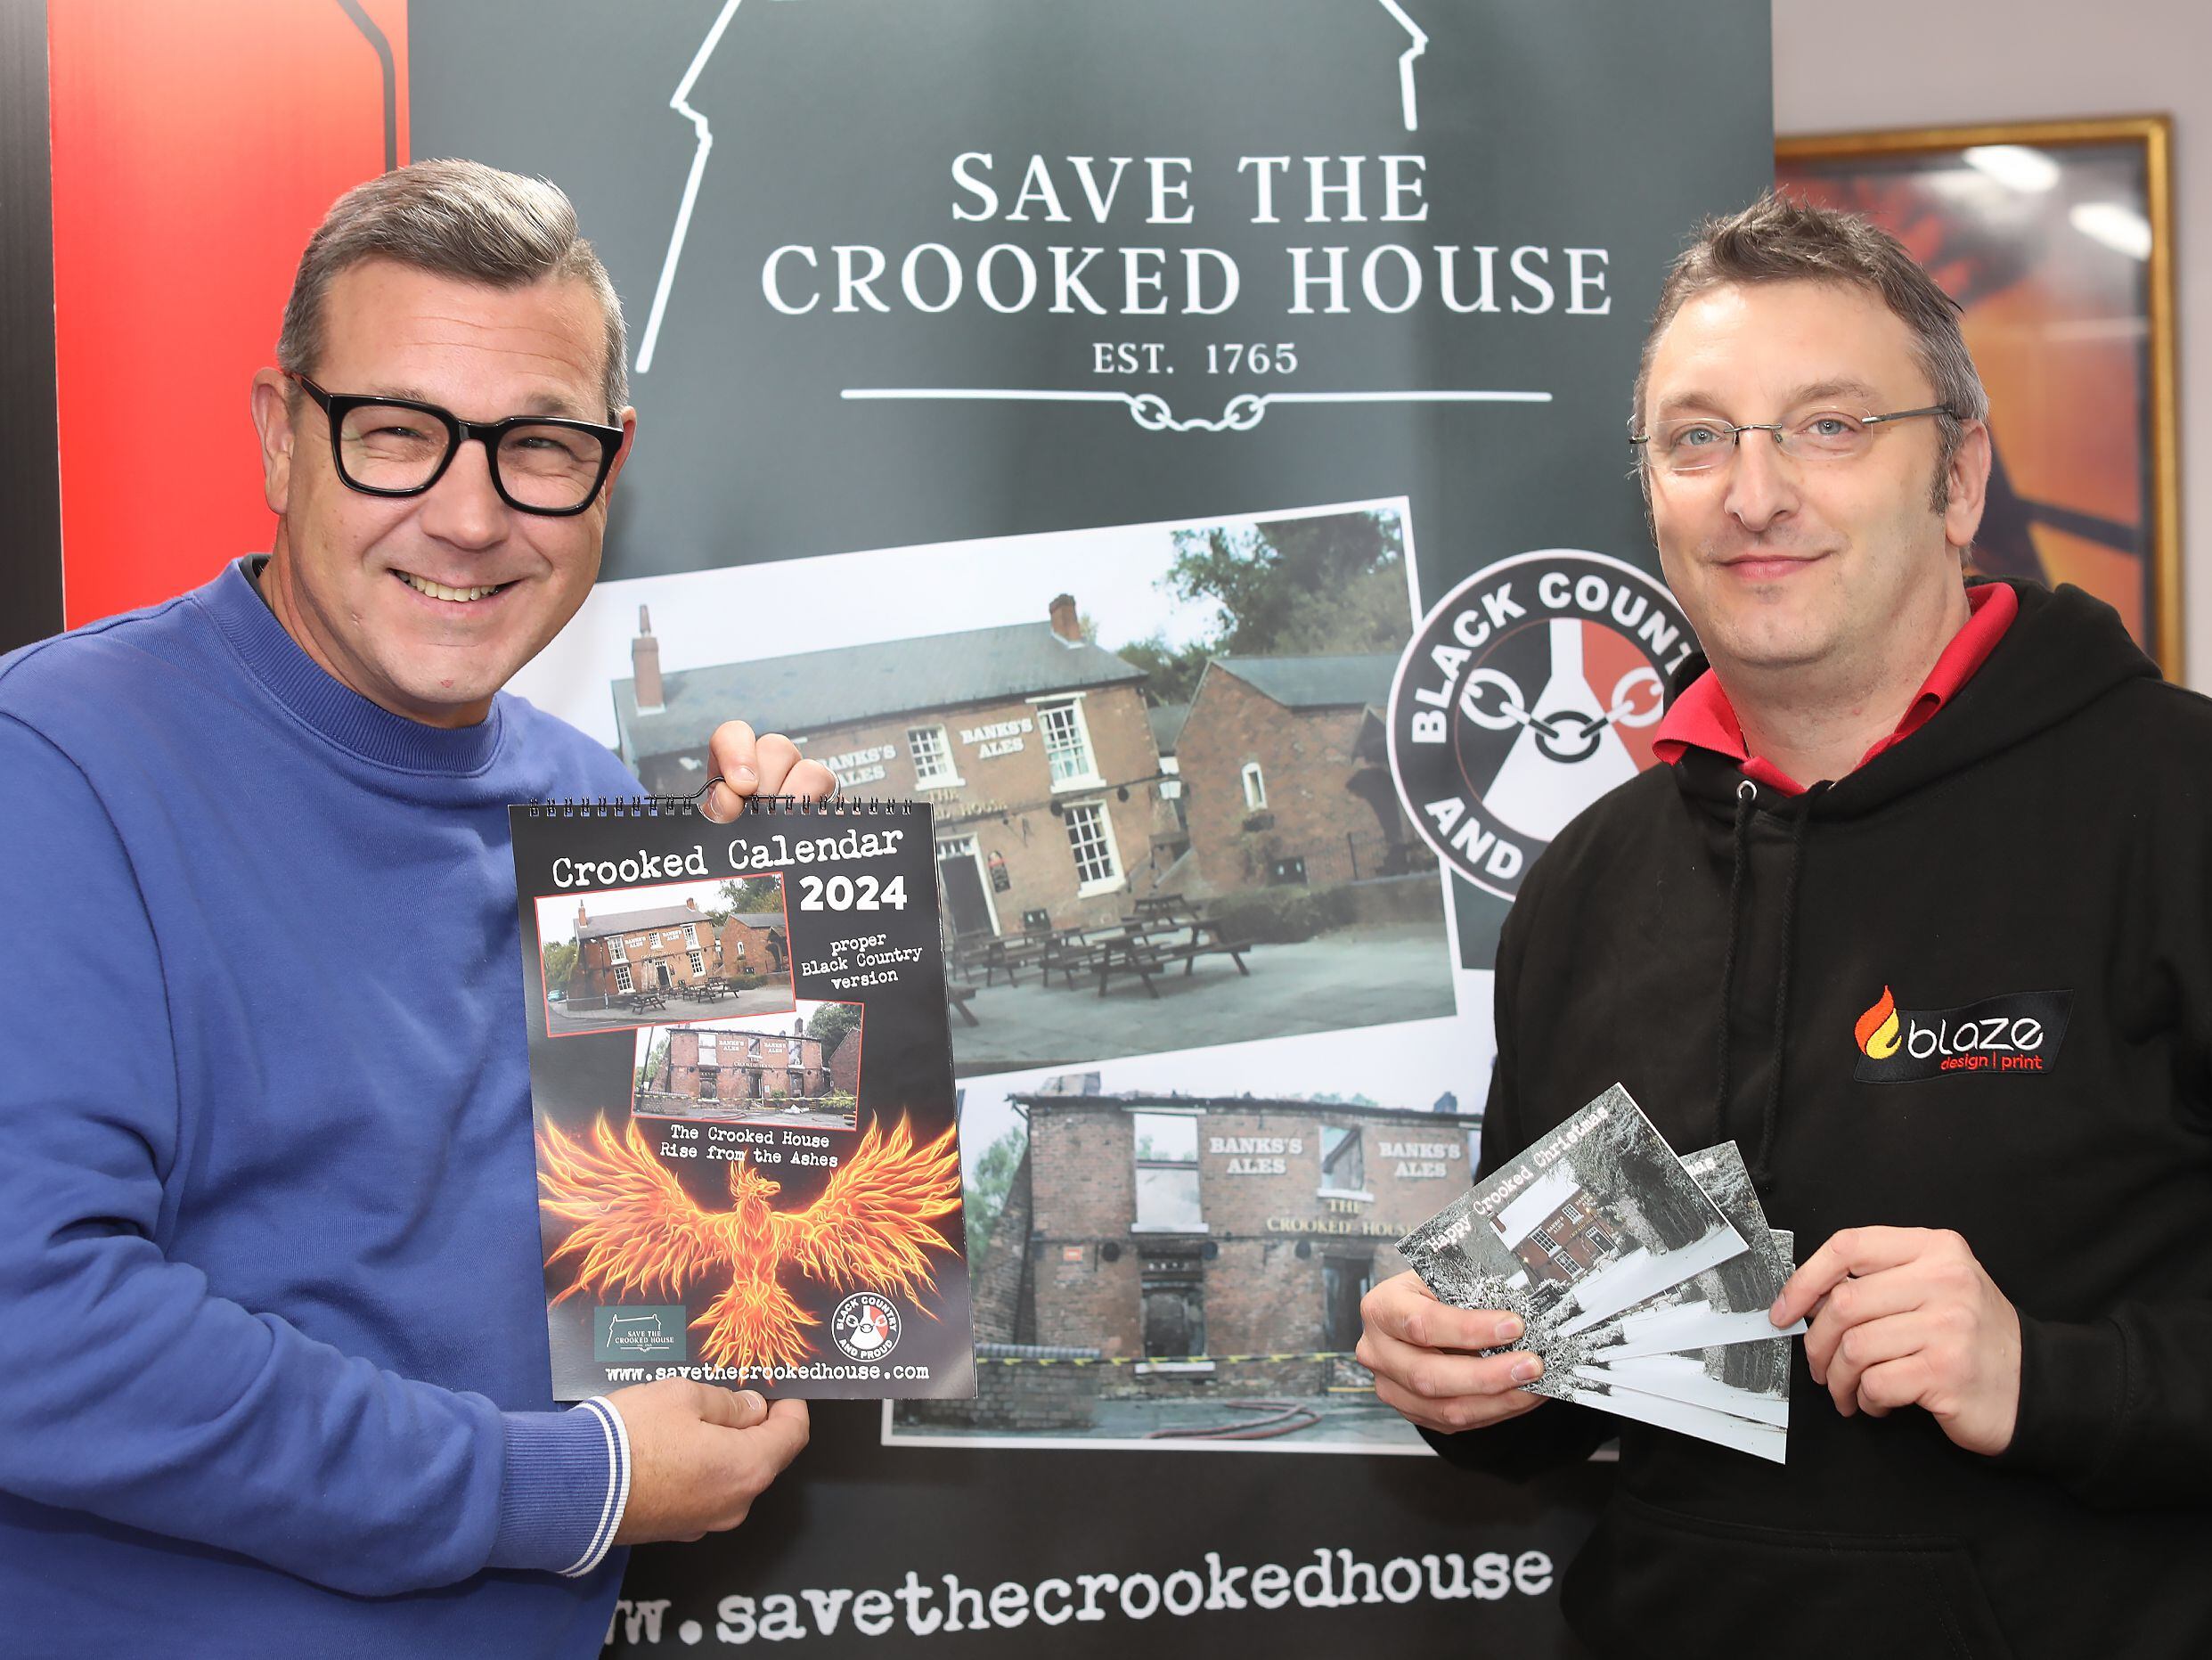 Crooked House calendars and Christmas cards go on sale – and are just as wonky as the famous pub